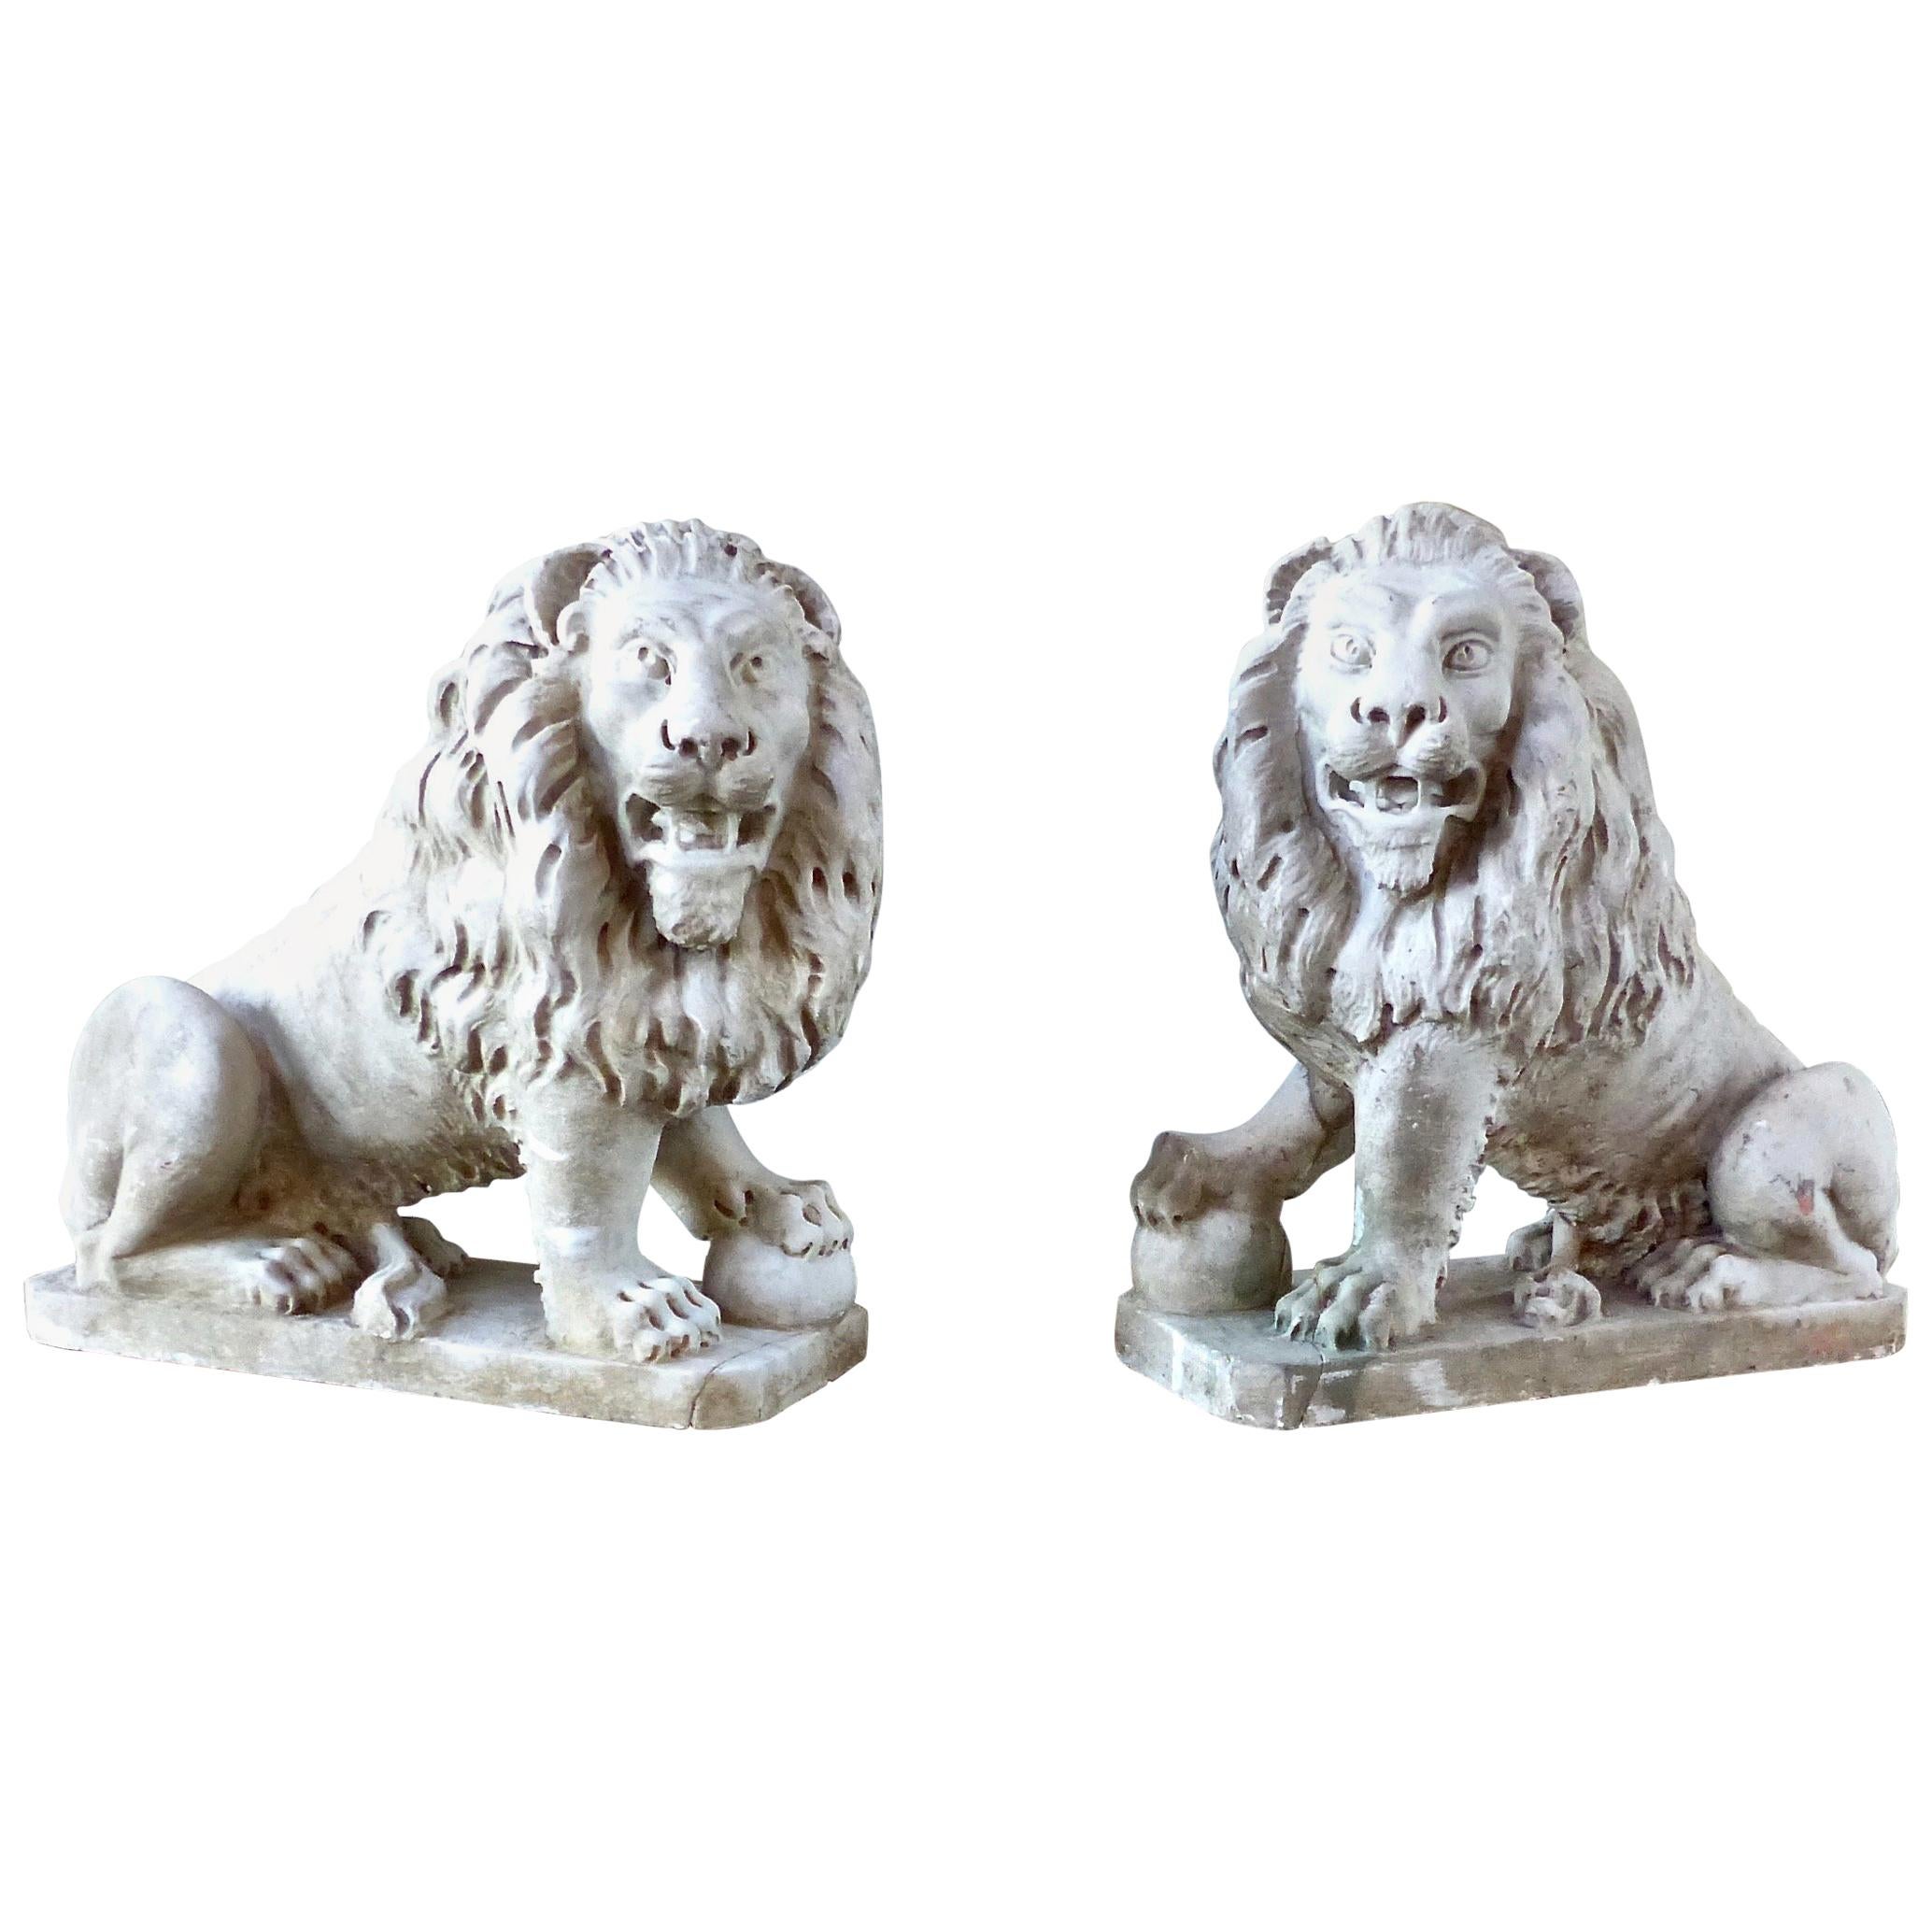 19th c Pair of Italian Hand-Carved Solid Marble Lions from Venice